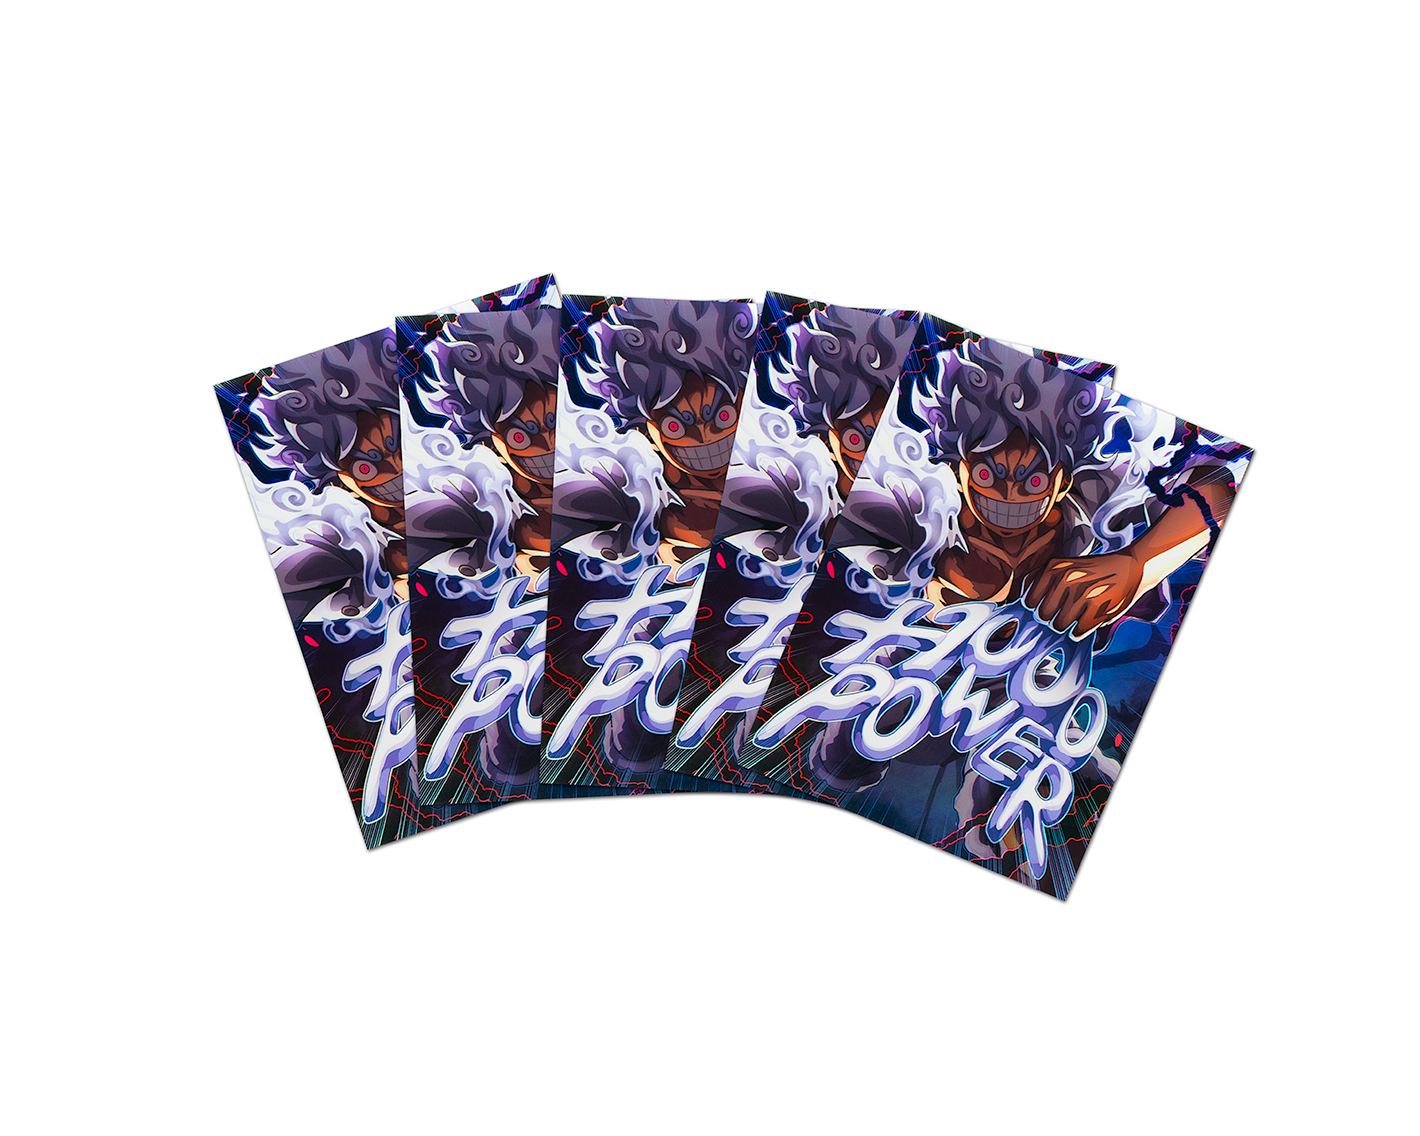 Gear 5 - Don Holo Sleeves (10 PC)